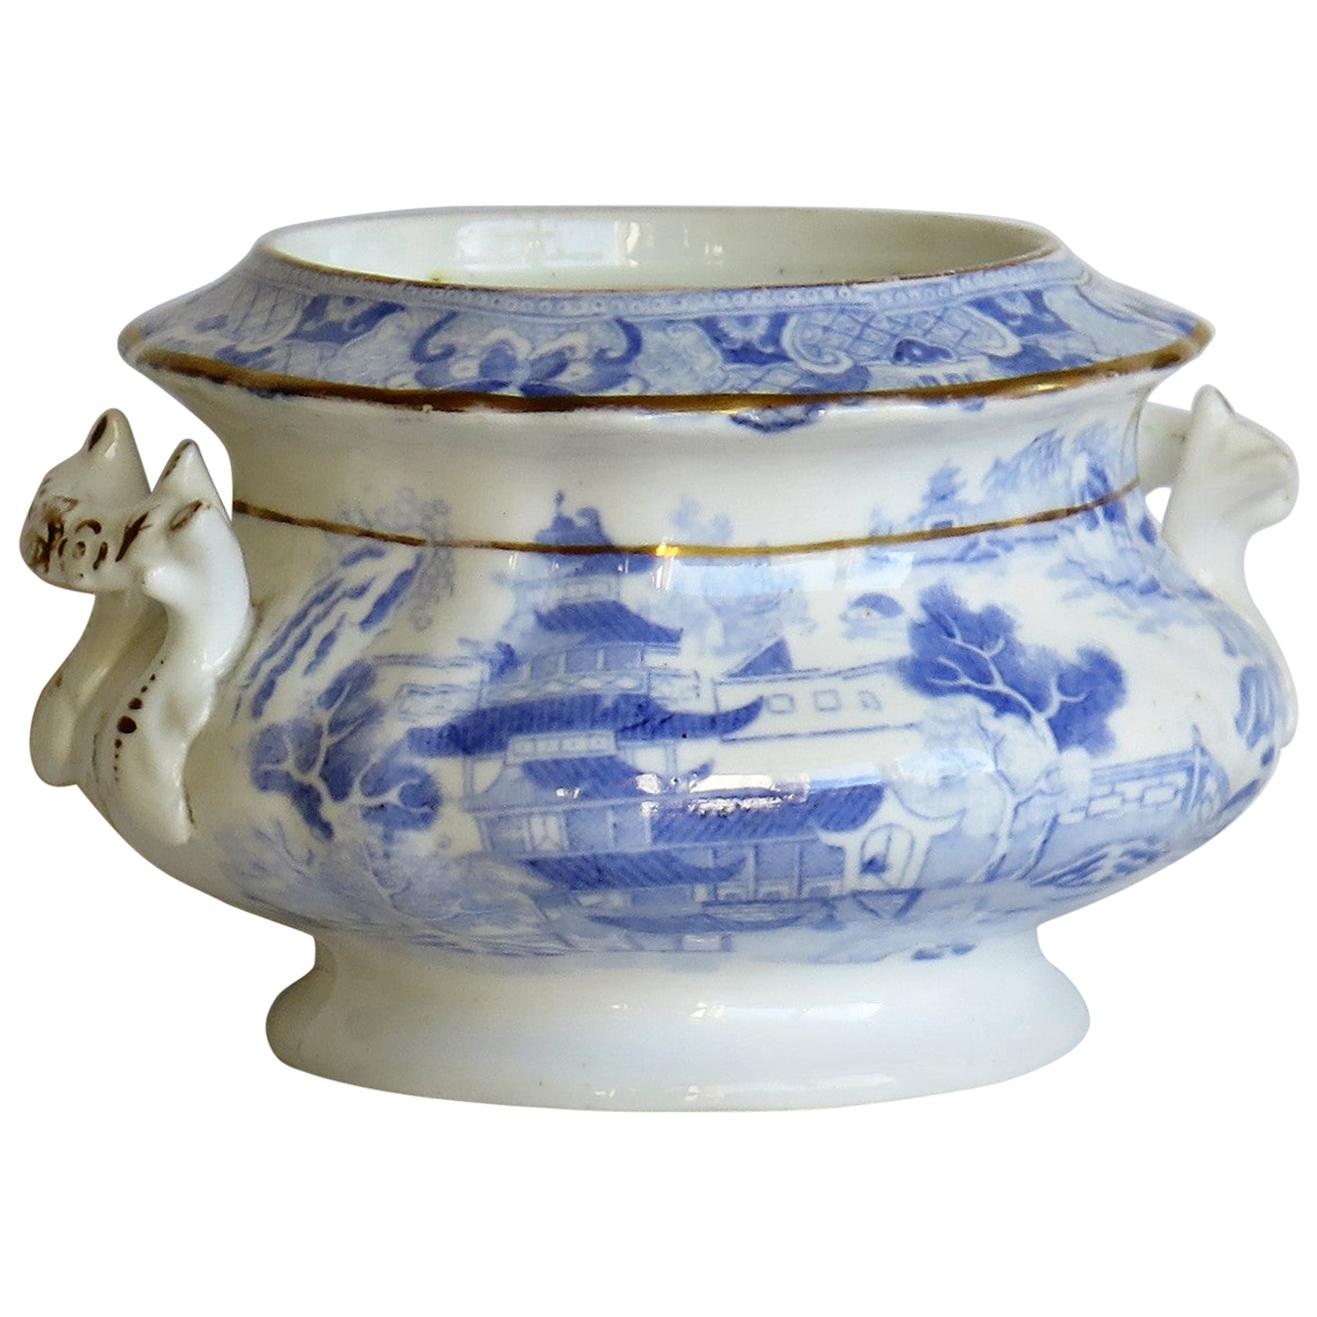 Miles Mason Porcelain Sucrier Blue and White Broseley Willow Pattern, circa 1810